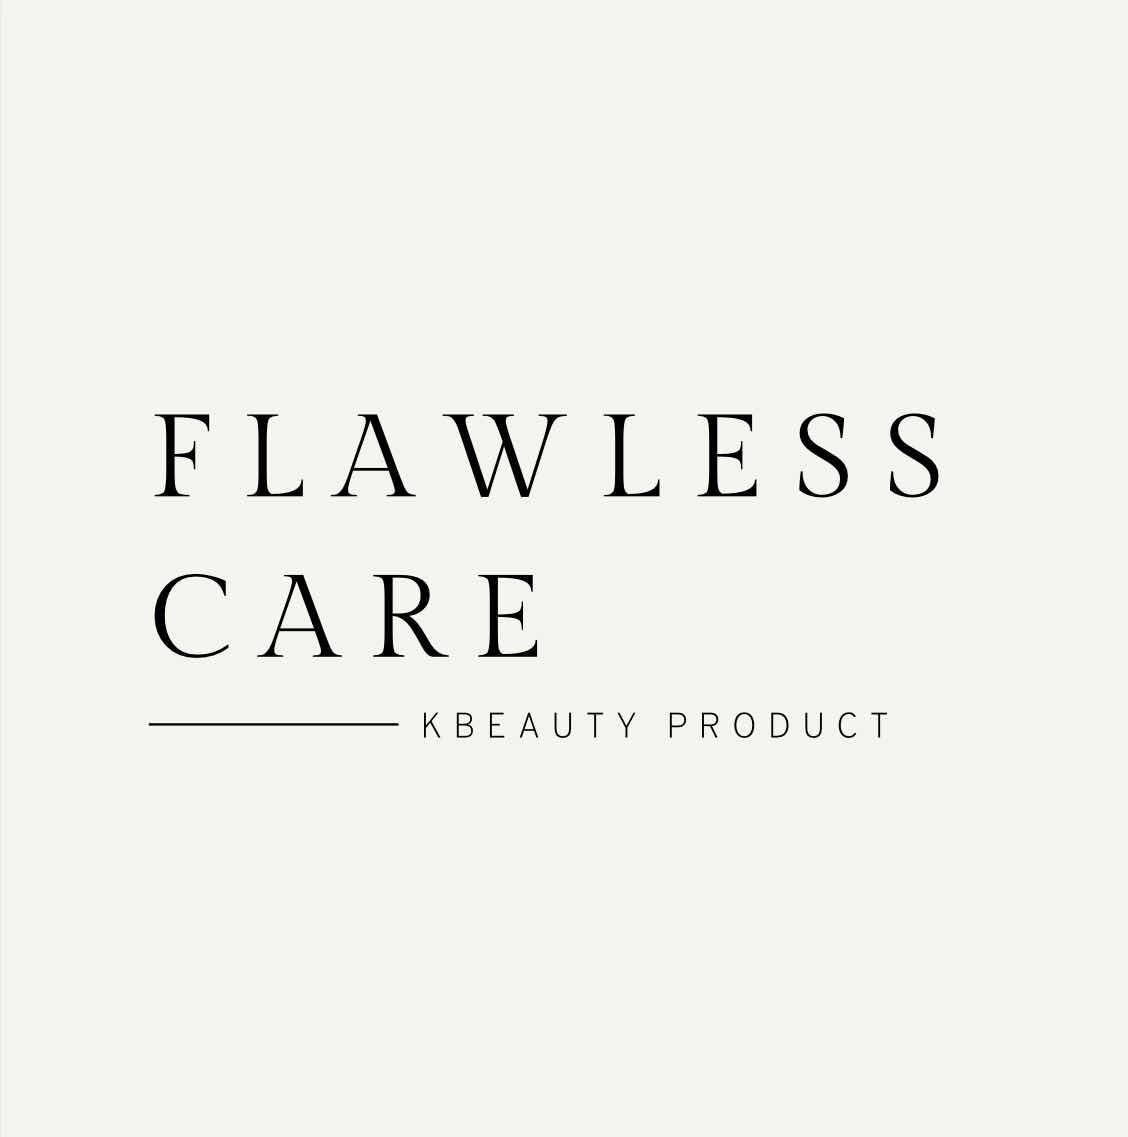 FLAWLESSCARE